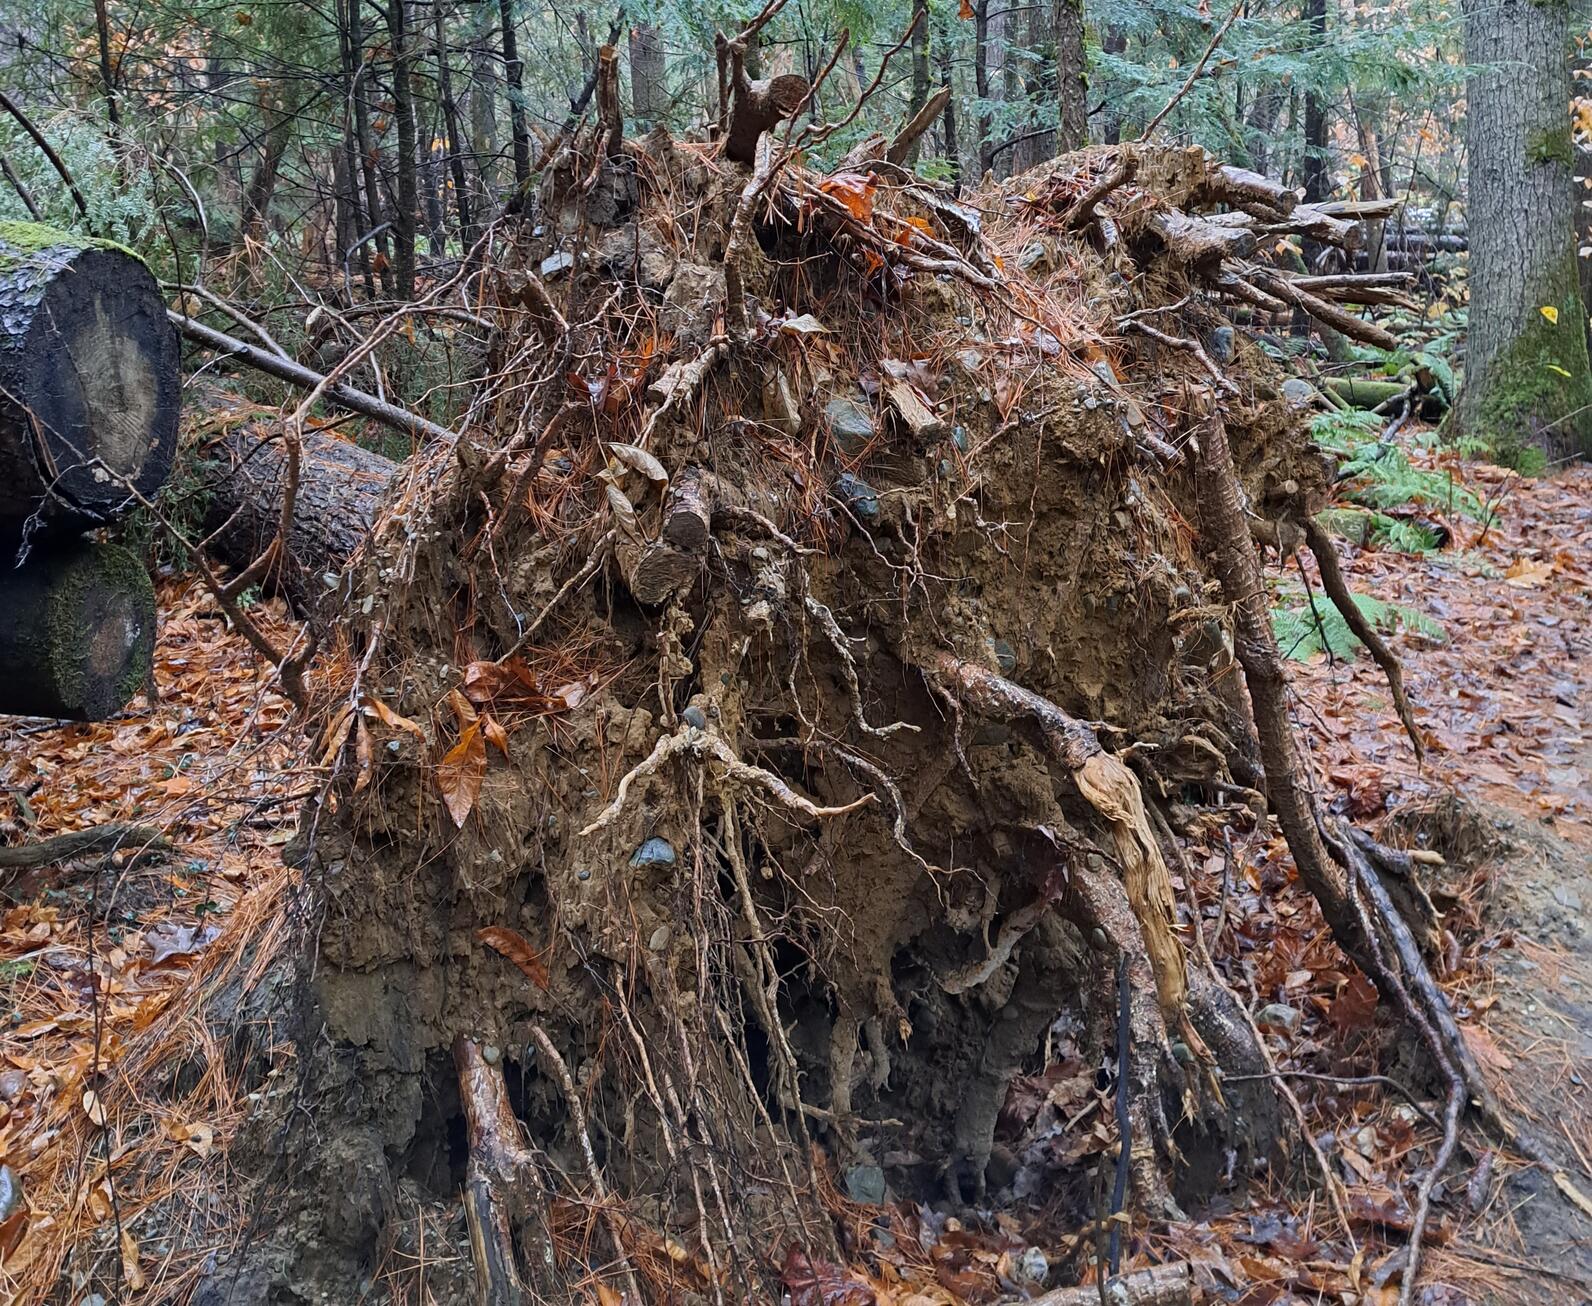 A large tree fell over from a windstorm, now showing the muddy bottom of it's root system, where Winter Wrens tend to form nests. 